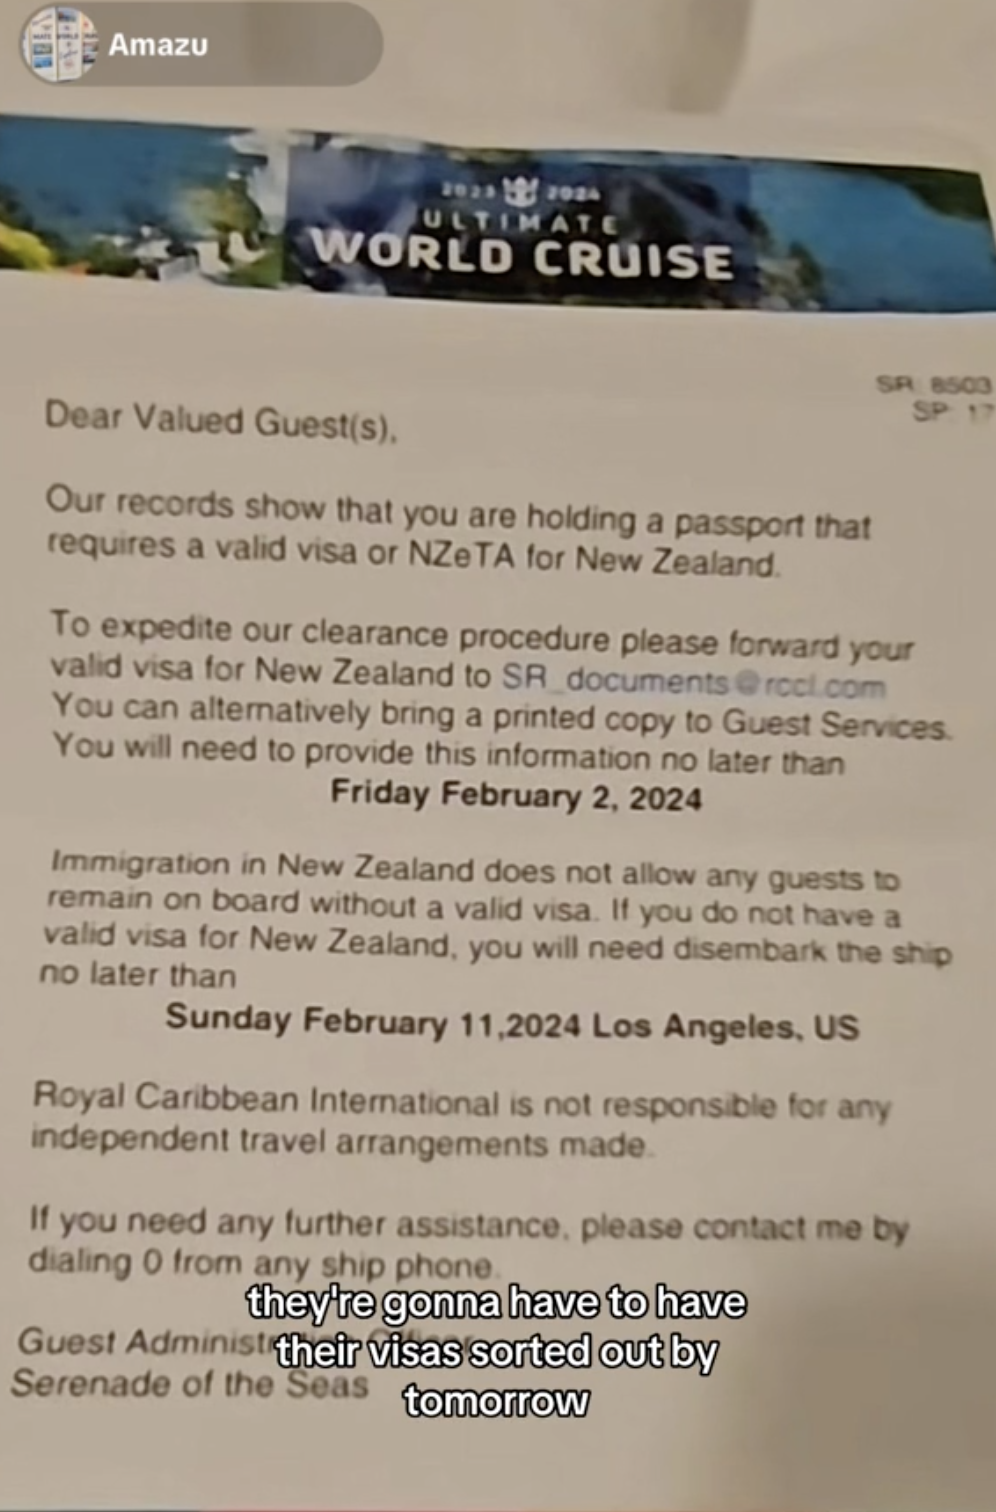 The letter some passengers on the Ultimate World Cruise received states they need to ensure they have their electronic visa's or face being disembarked (TikTok)